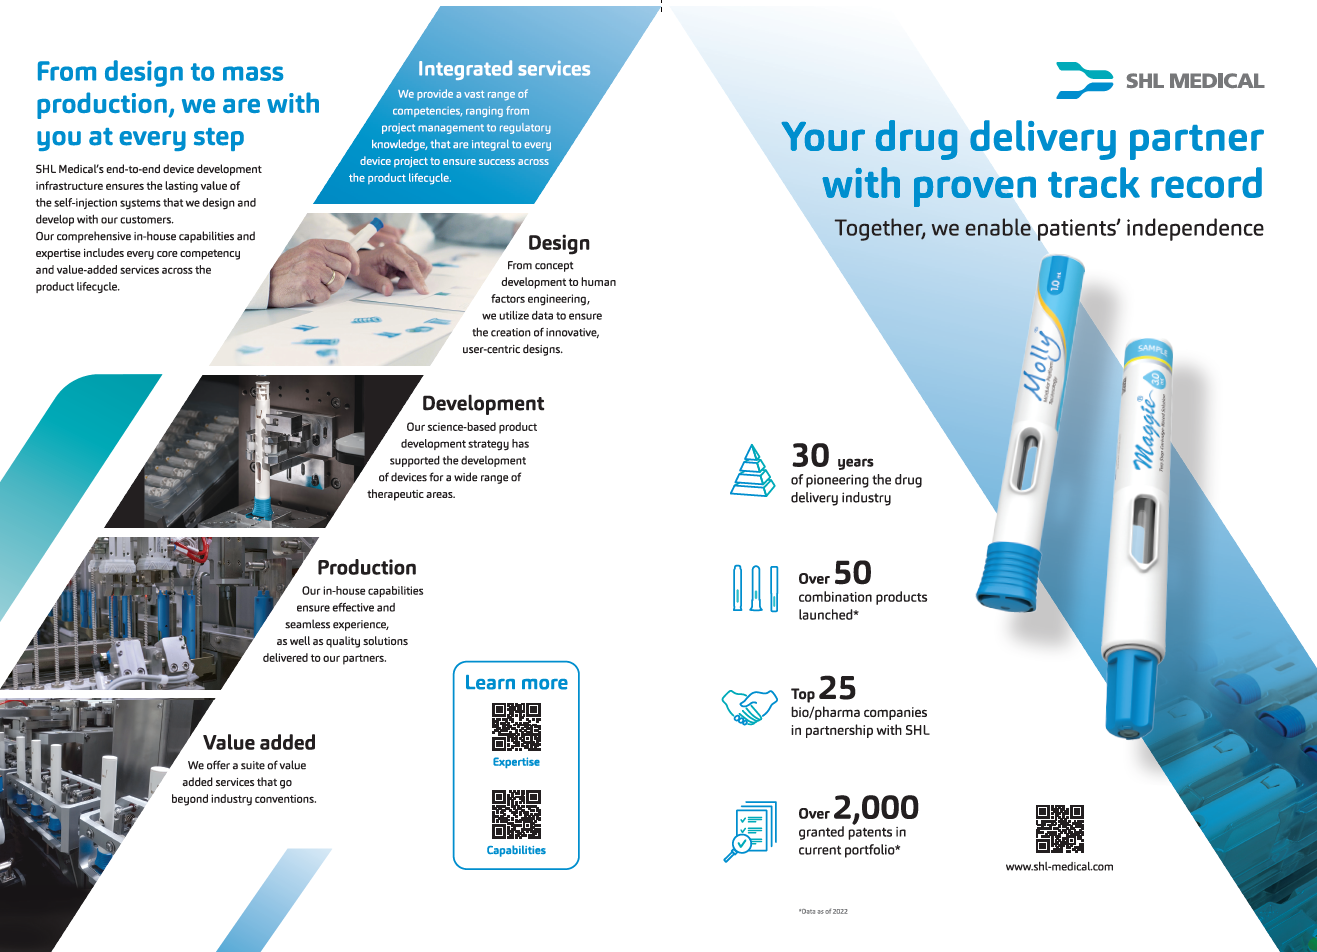 Your drug delivery partner with proven track record